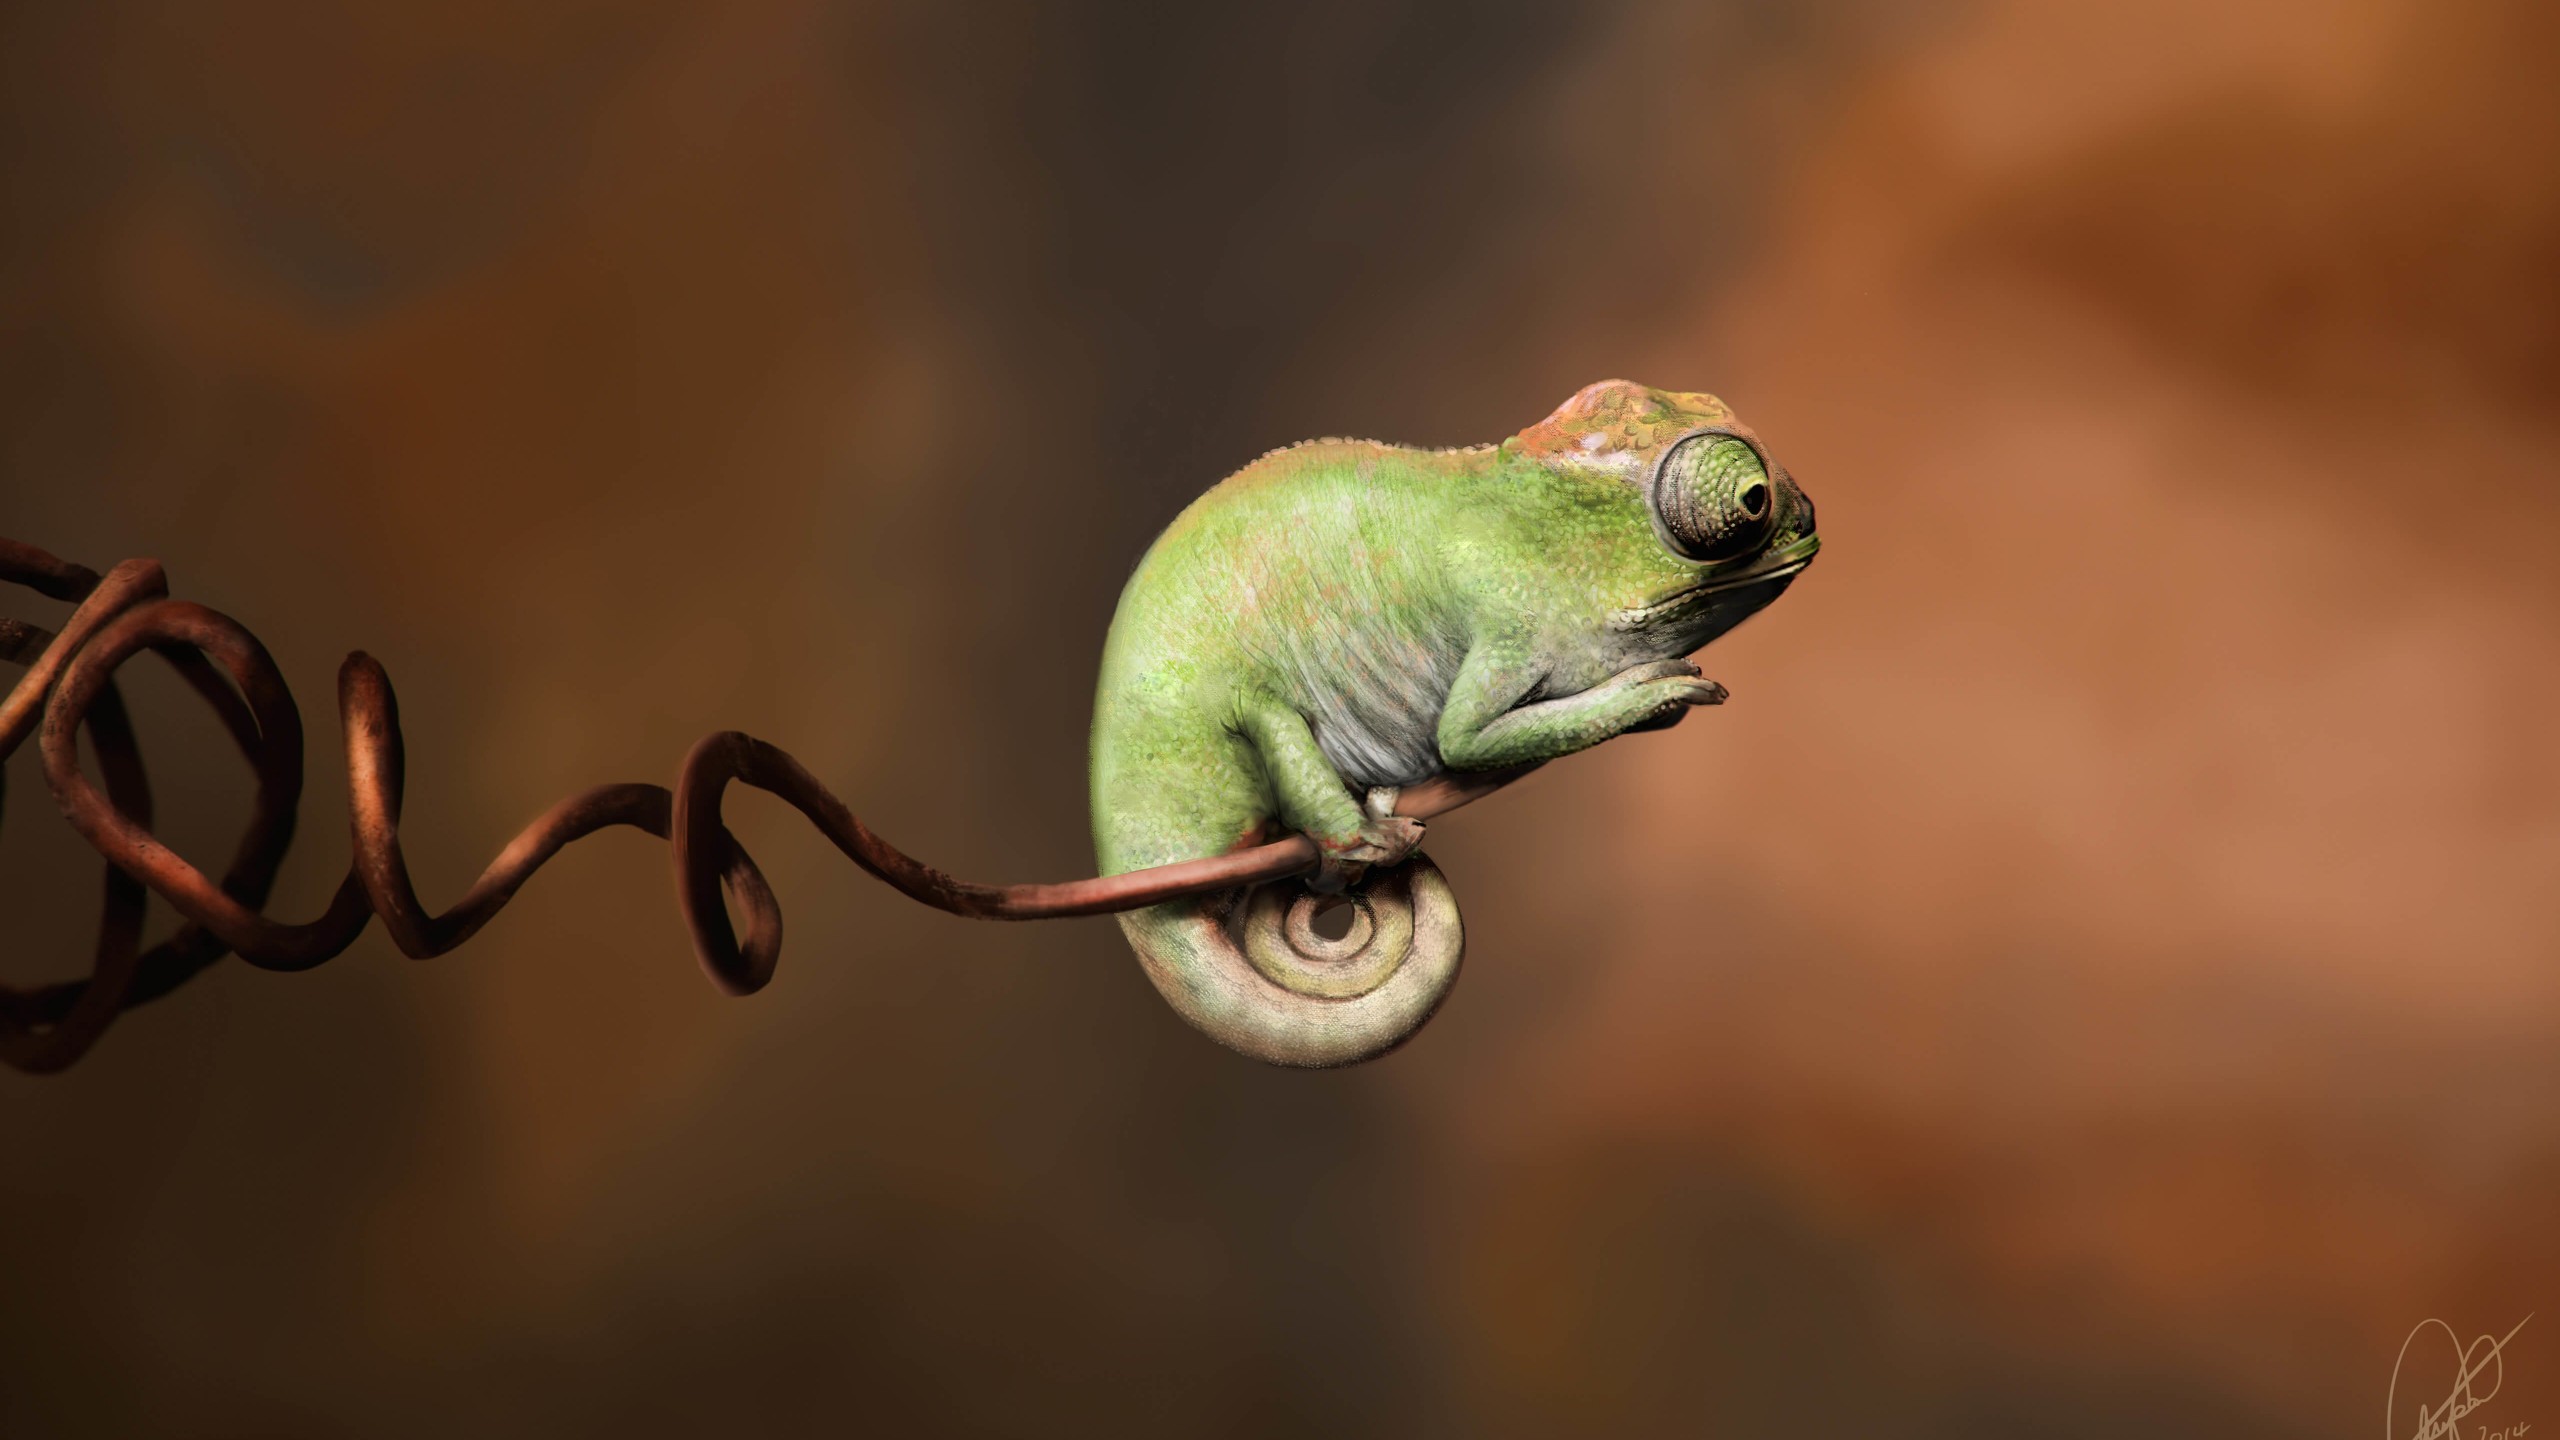 Baby Chameleon Perching On a Twisted Branch Wallpaper for Social Media YouTube Channel Art